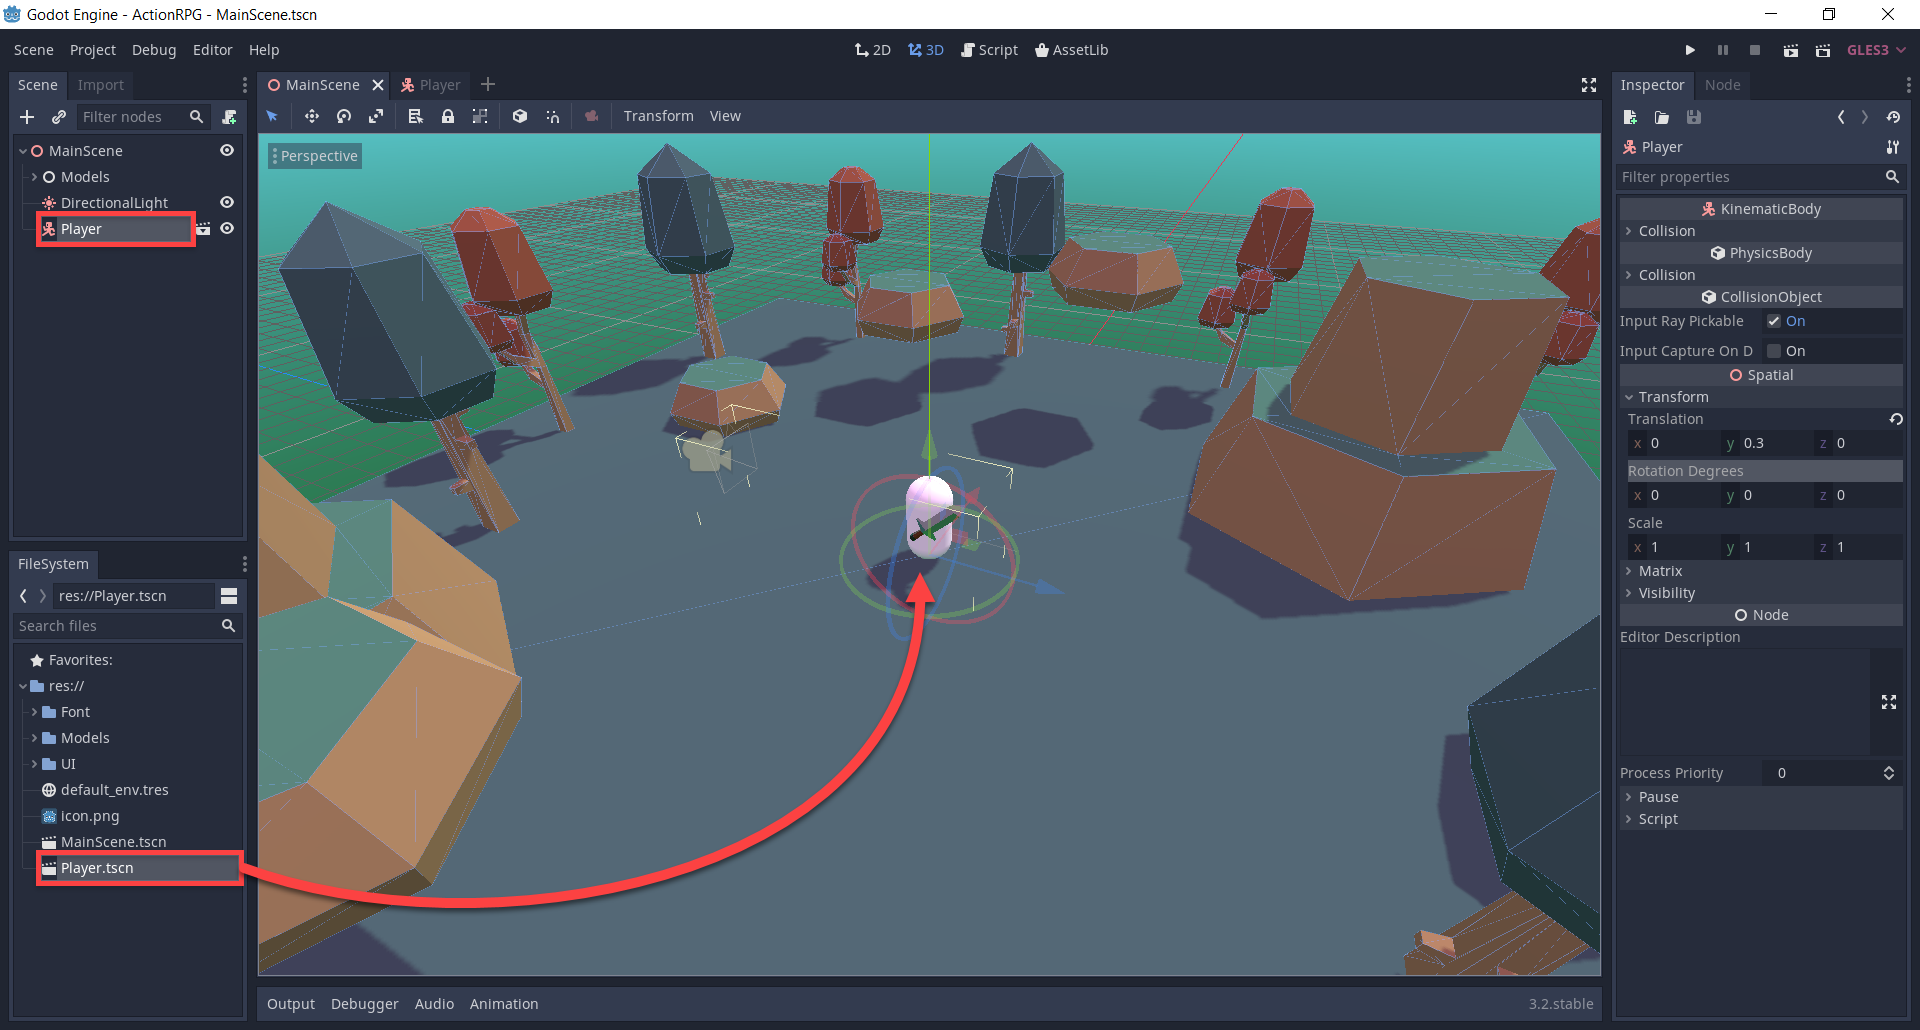 Godot player added to MainScene in editor